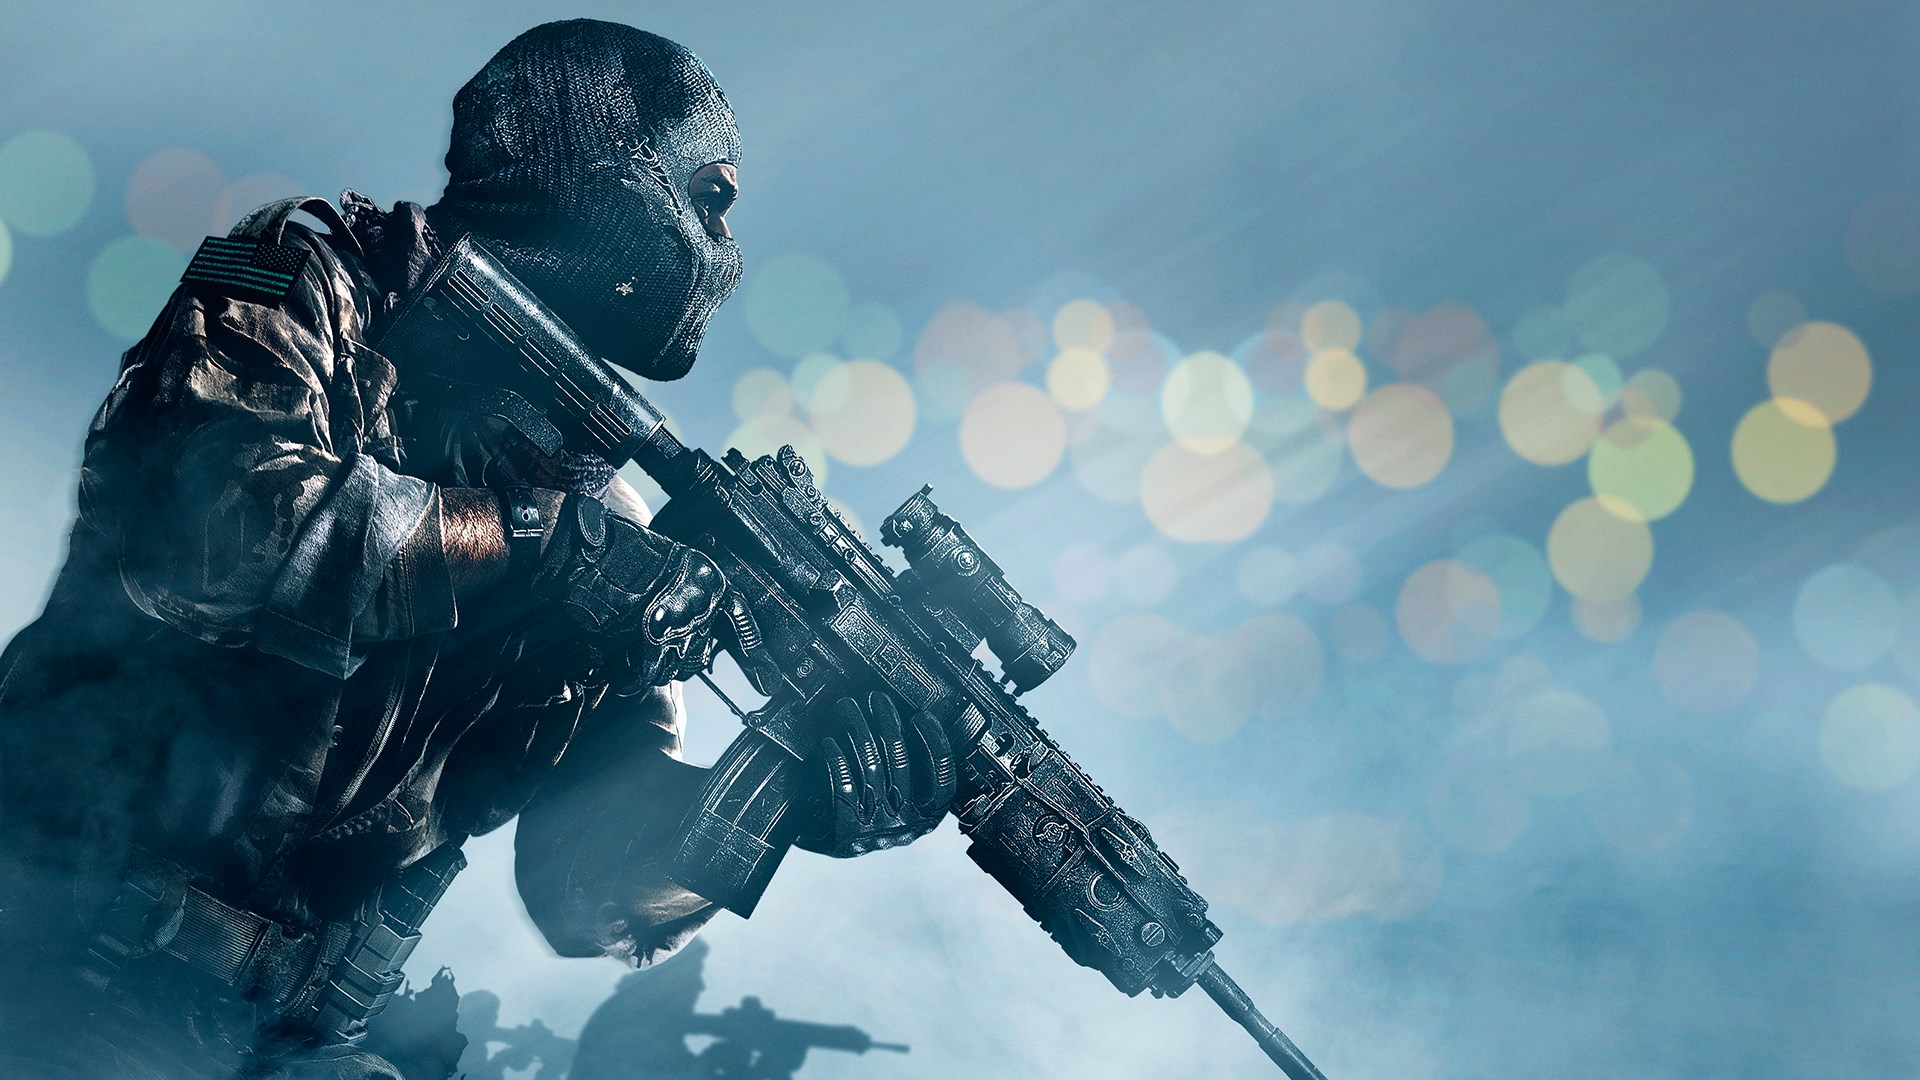 Call of Duty: Ghosts PC Game - Free Download Full Version